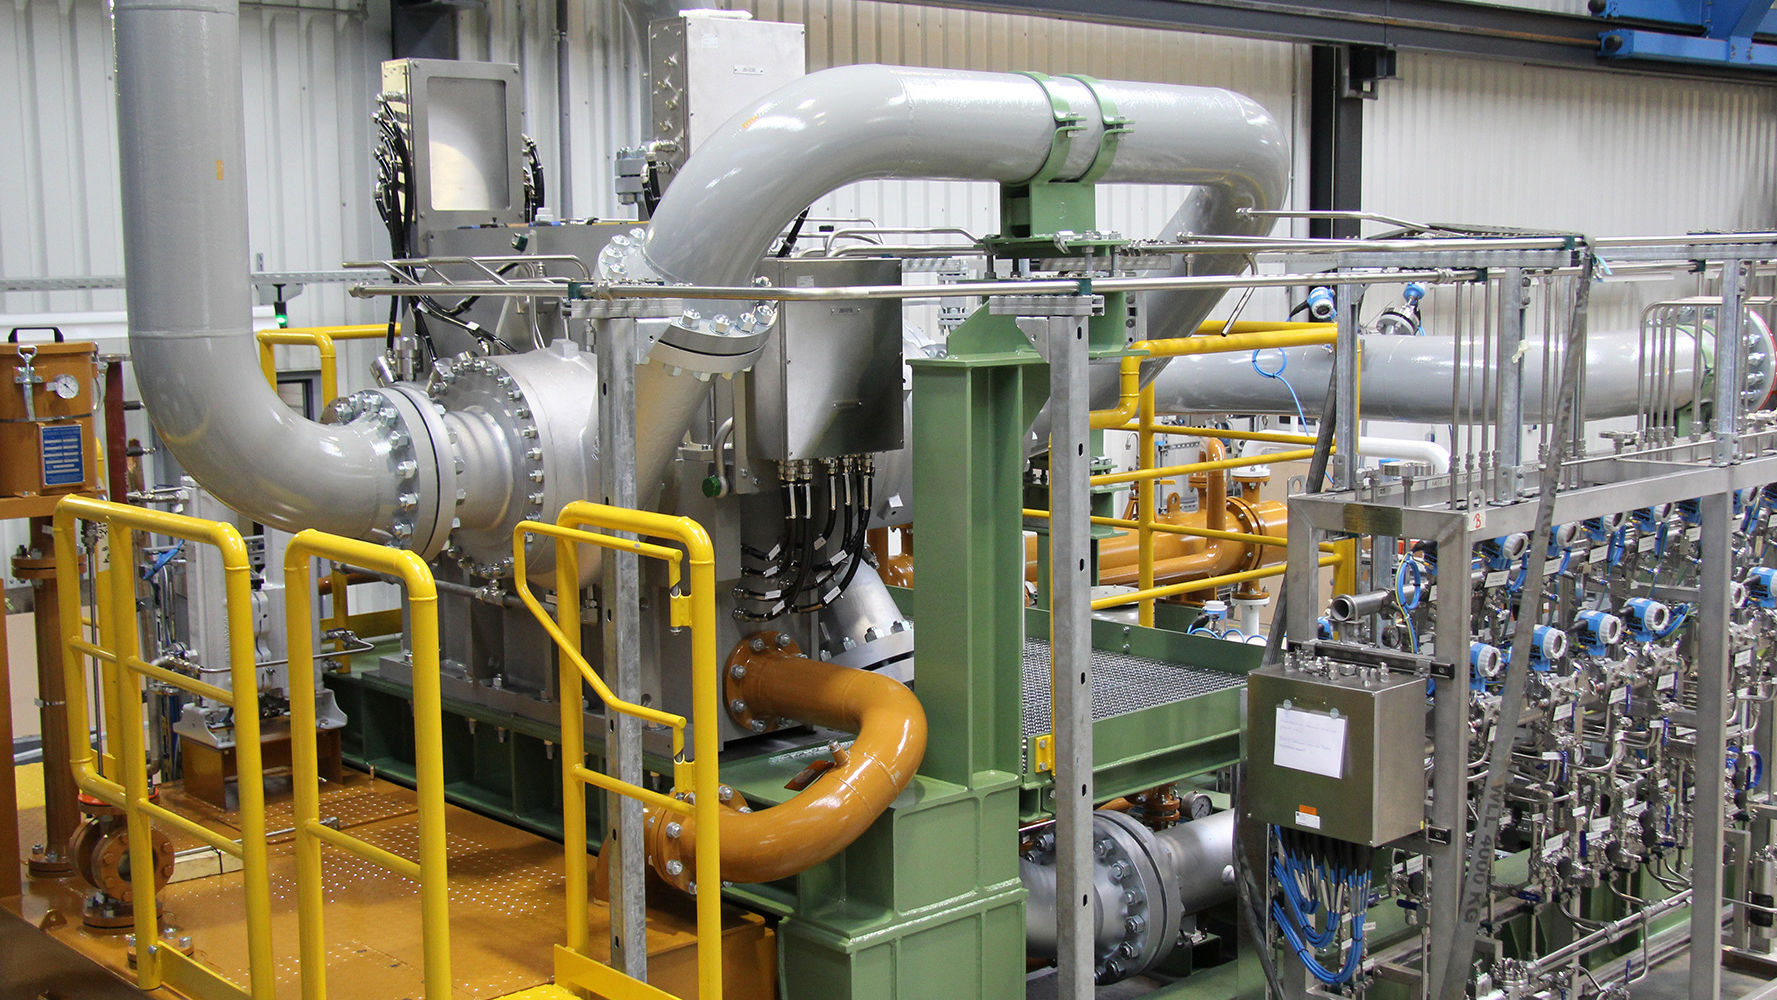 A integrally geared centrifugal compressor with process gas lines and DGS panel on the test field can be seen.